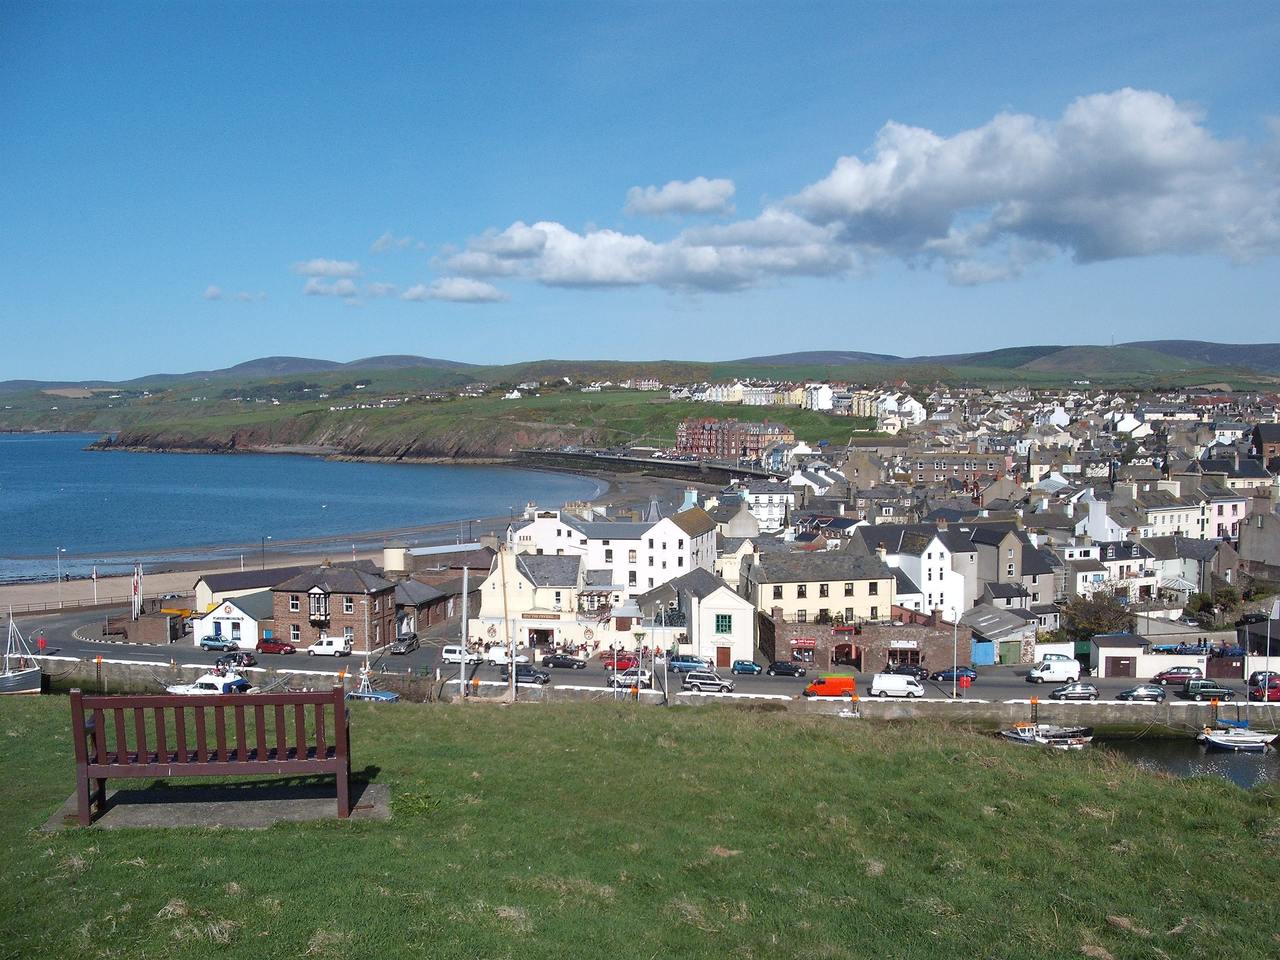 Here are 10 Great Reasons to Explore Isle of Man